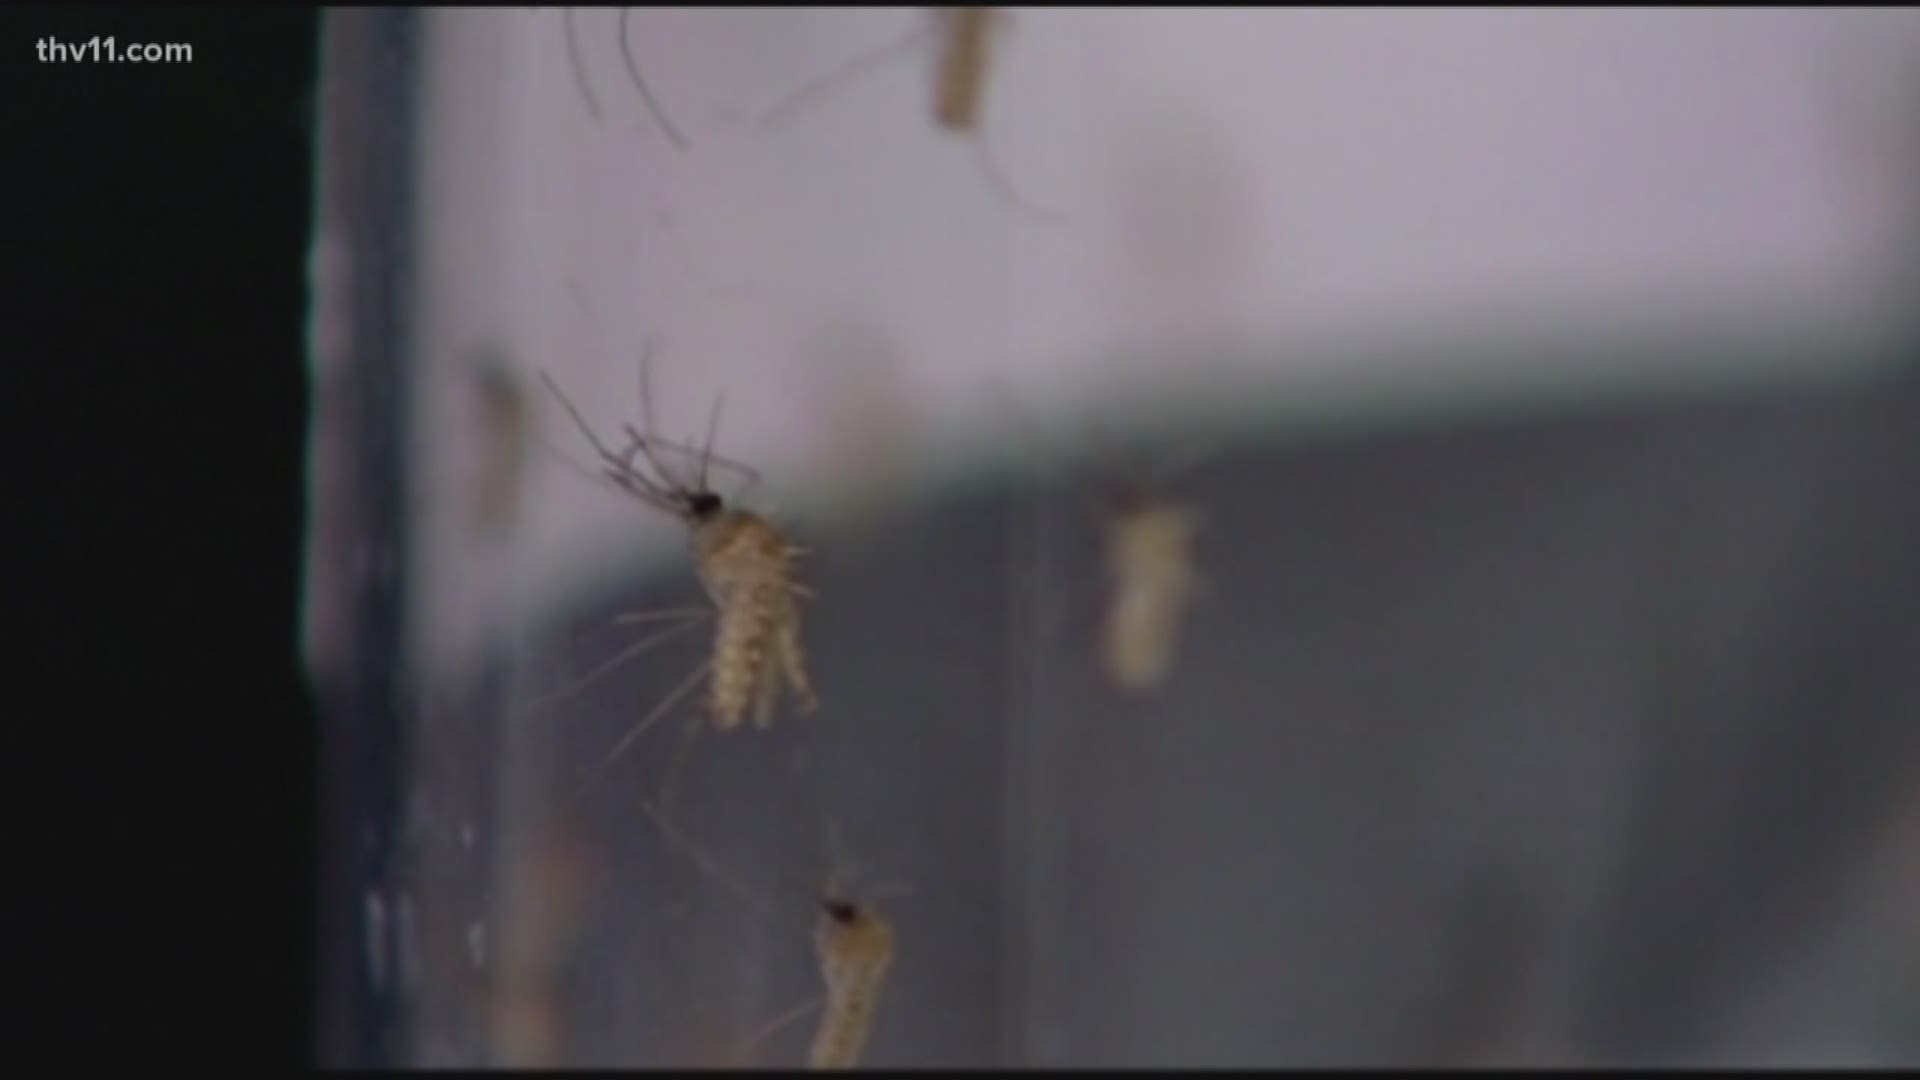 This fall, Arkansans have lots of unexpected visitors -- Mosquitos have become a pesky problem.